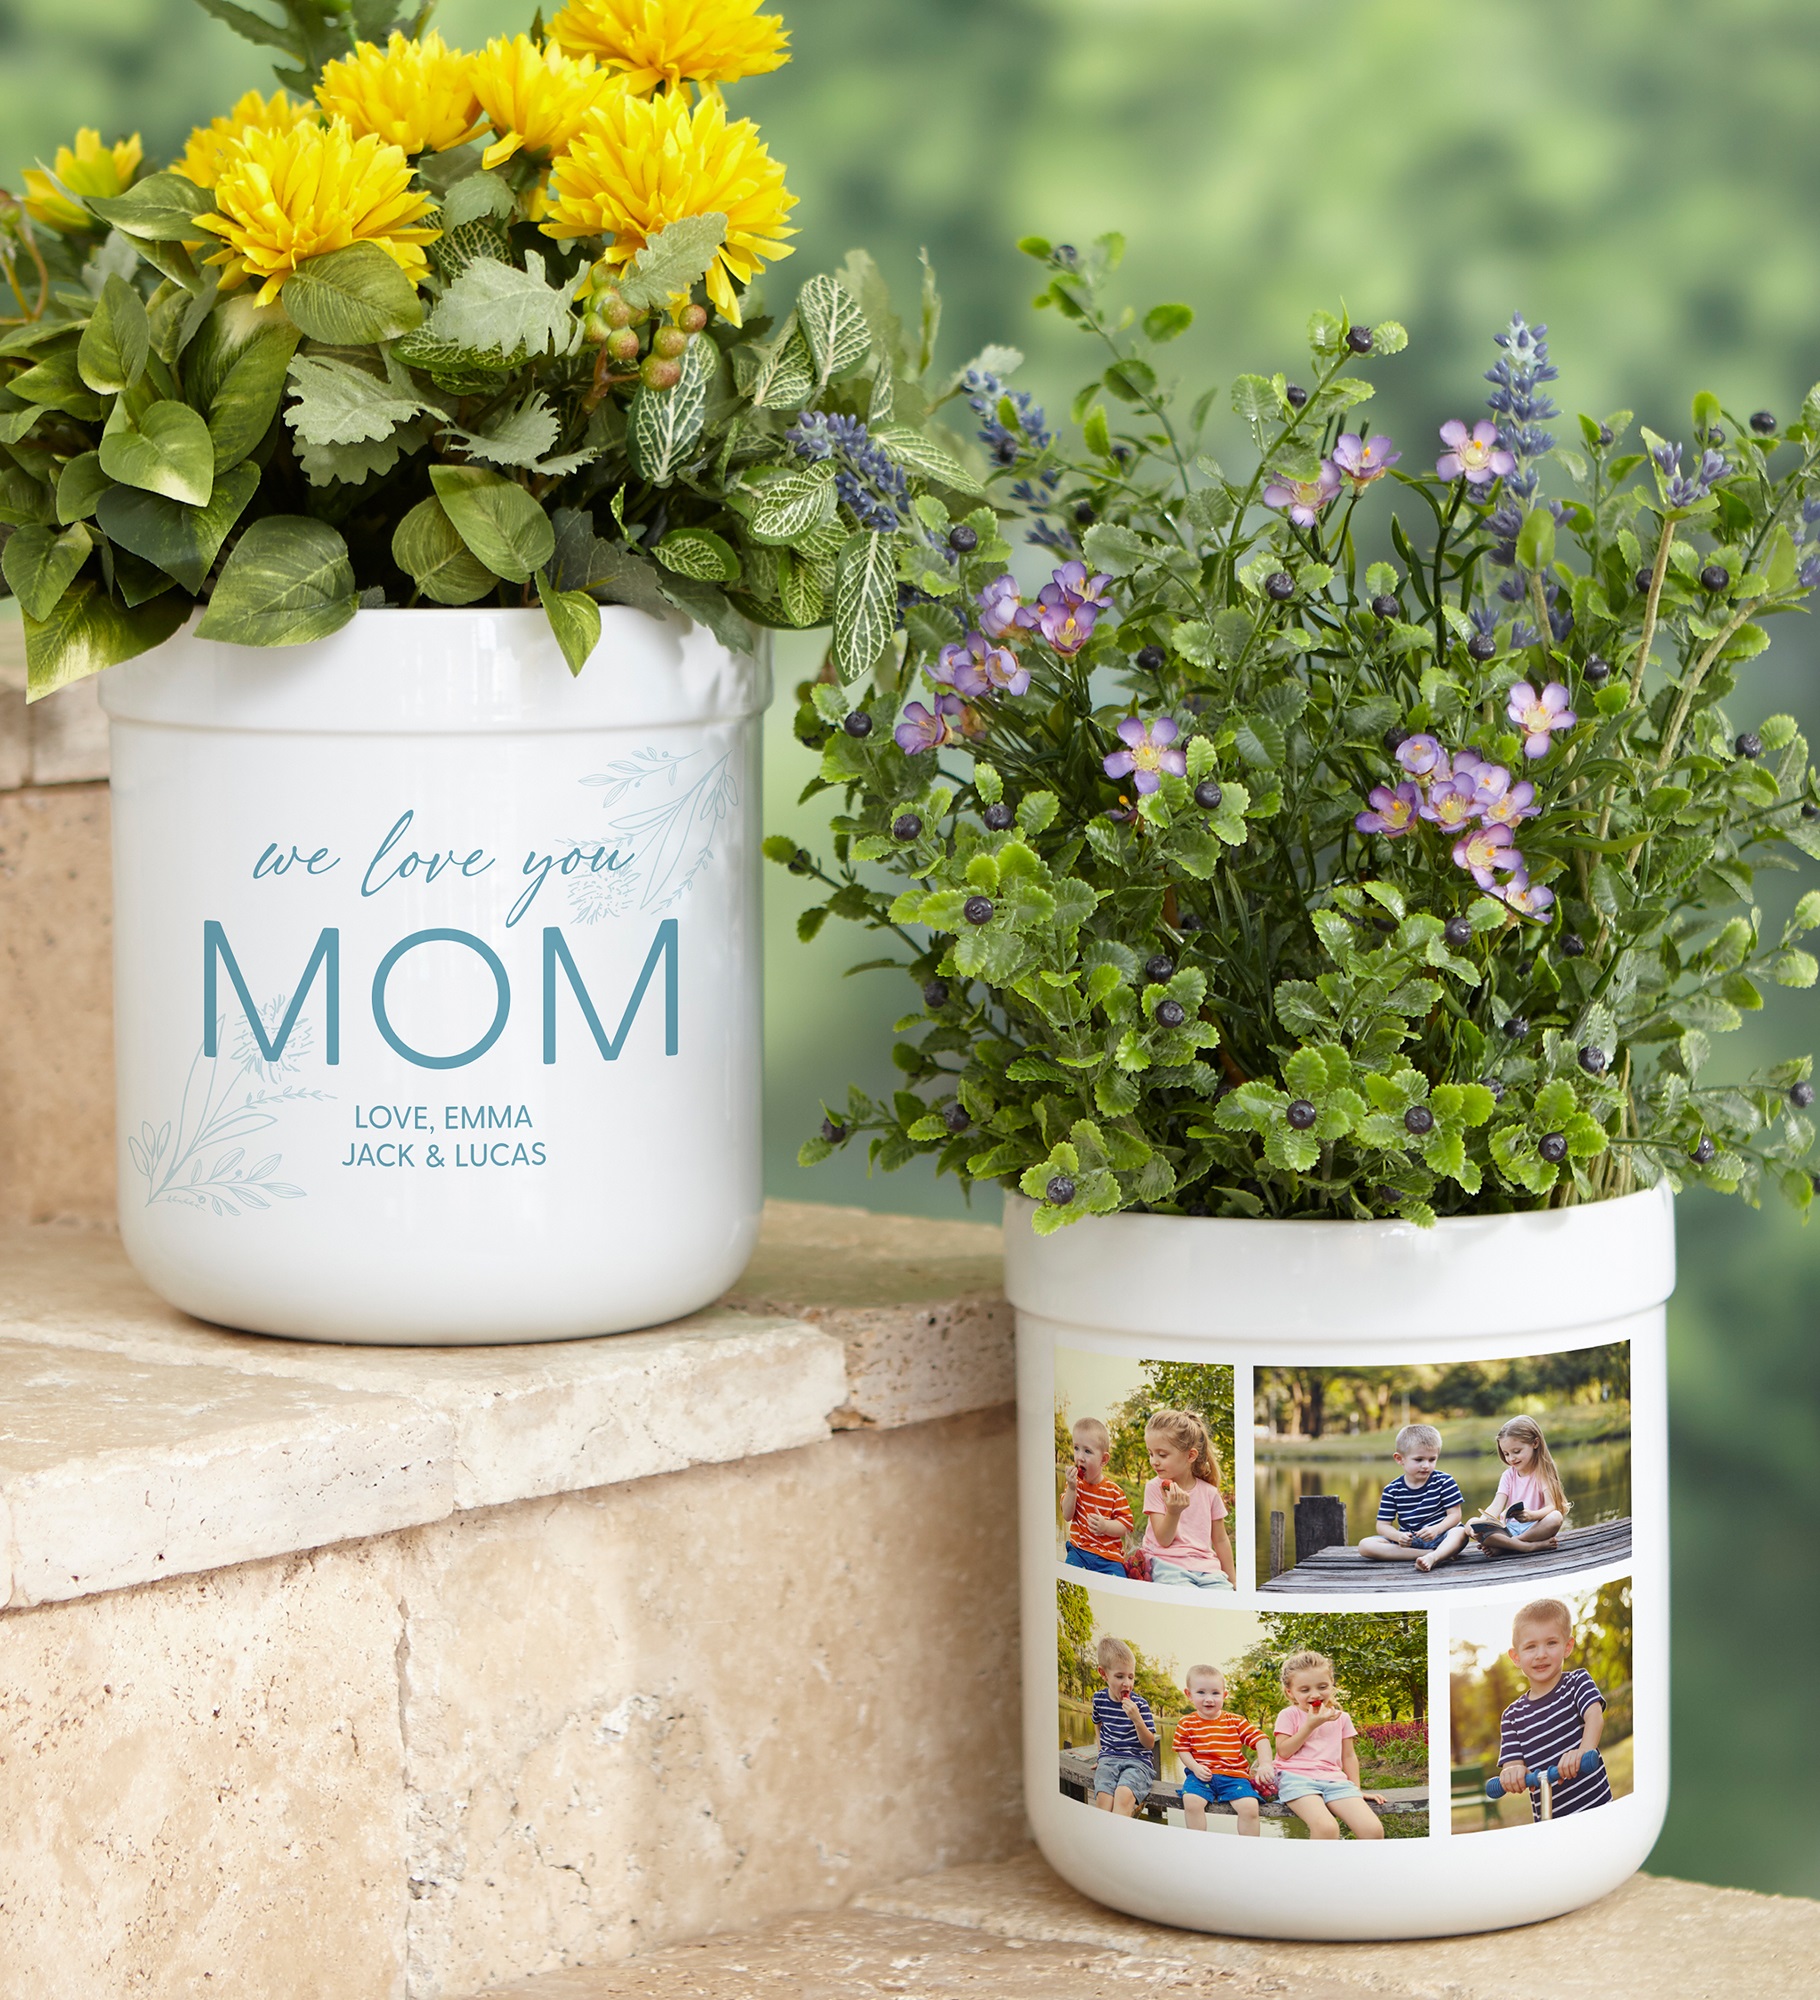 Her Memories Photo Collage Personalized Outdoor Flower Pot